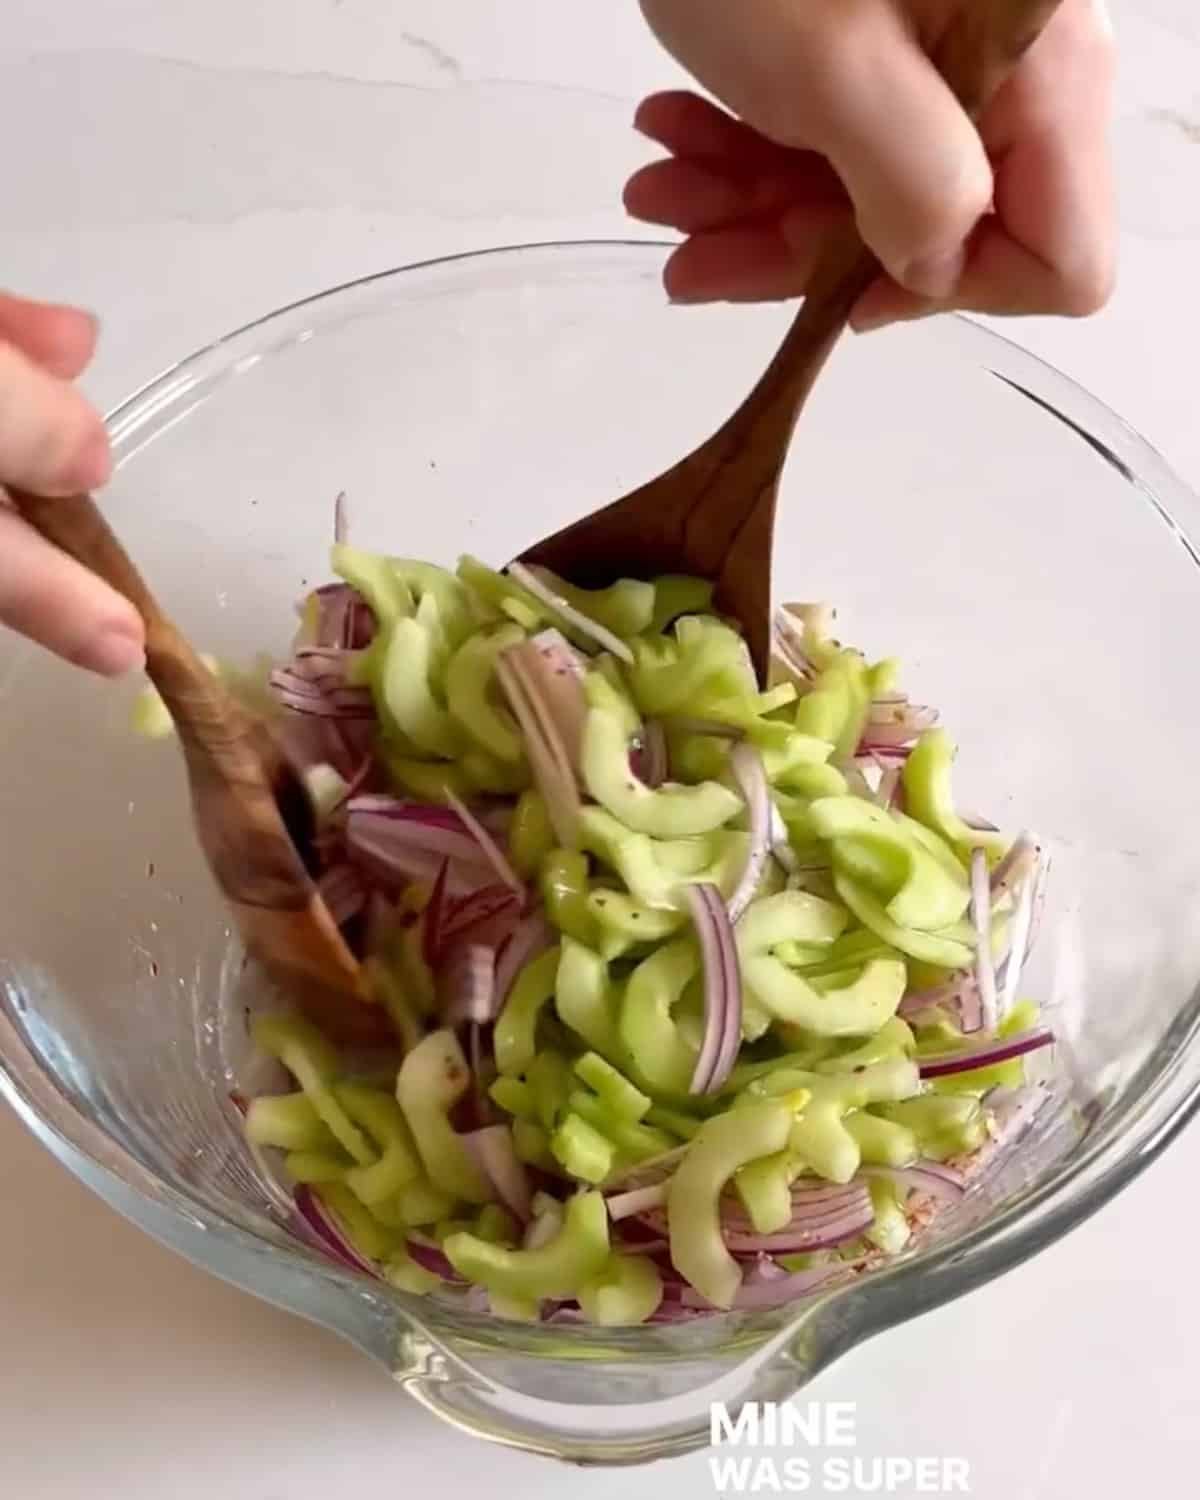 Salad utensils tossing cucumber salad ingredients in a mixing bowl